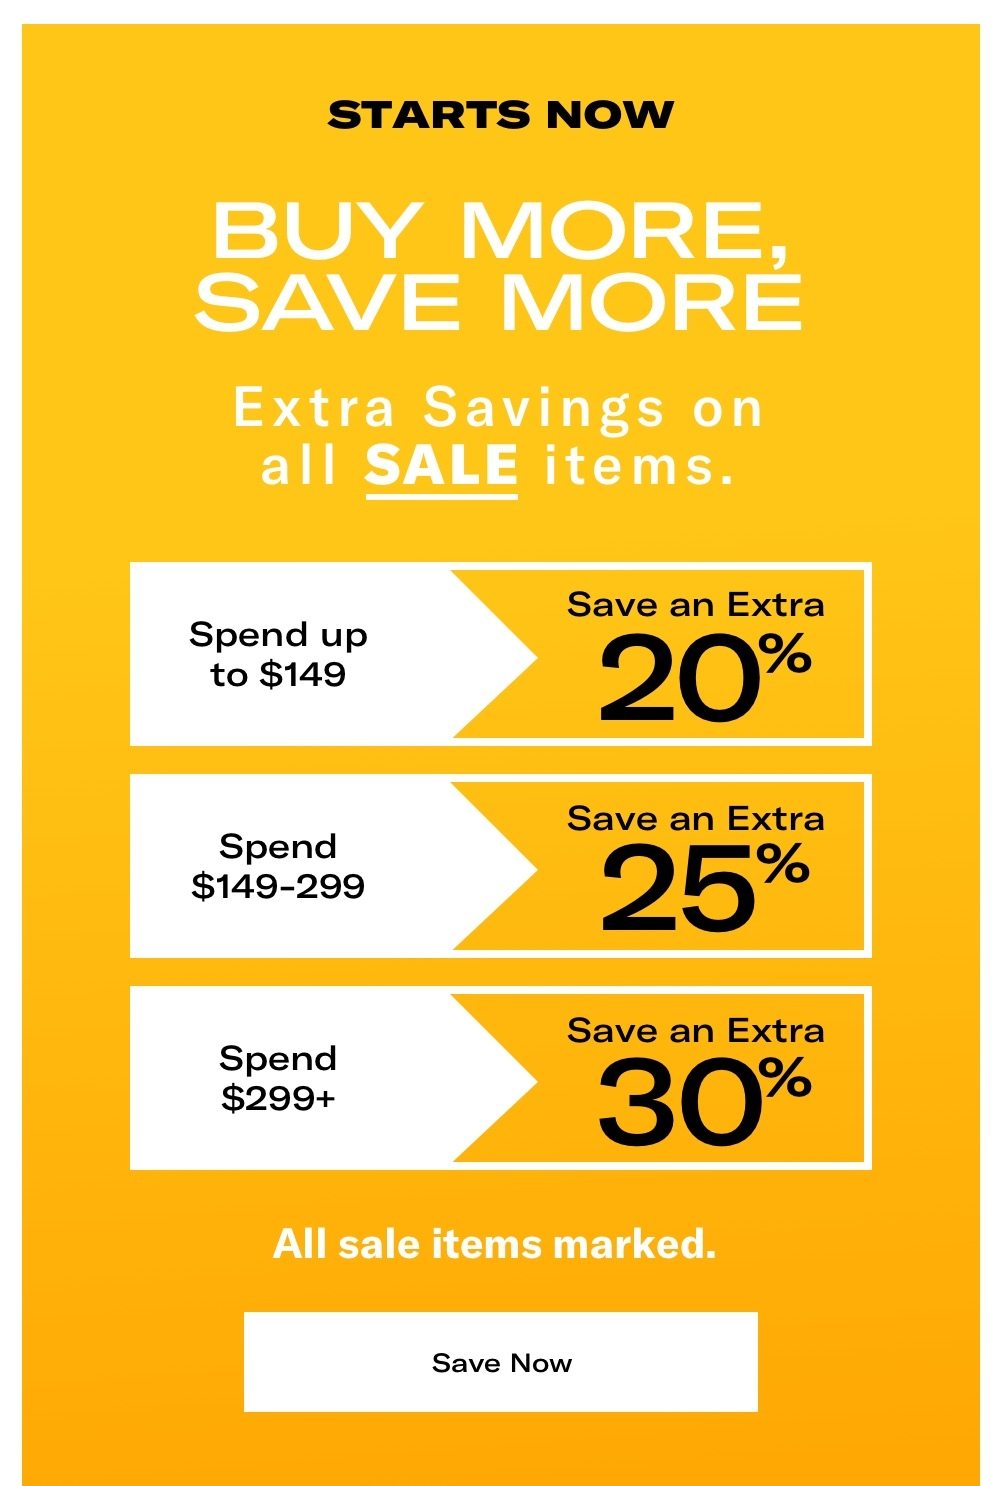 Starts Now - Buy More Save More - Save Up To 30% Off